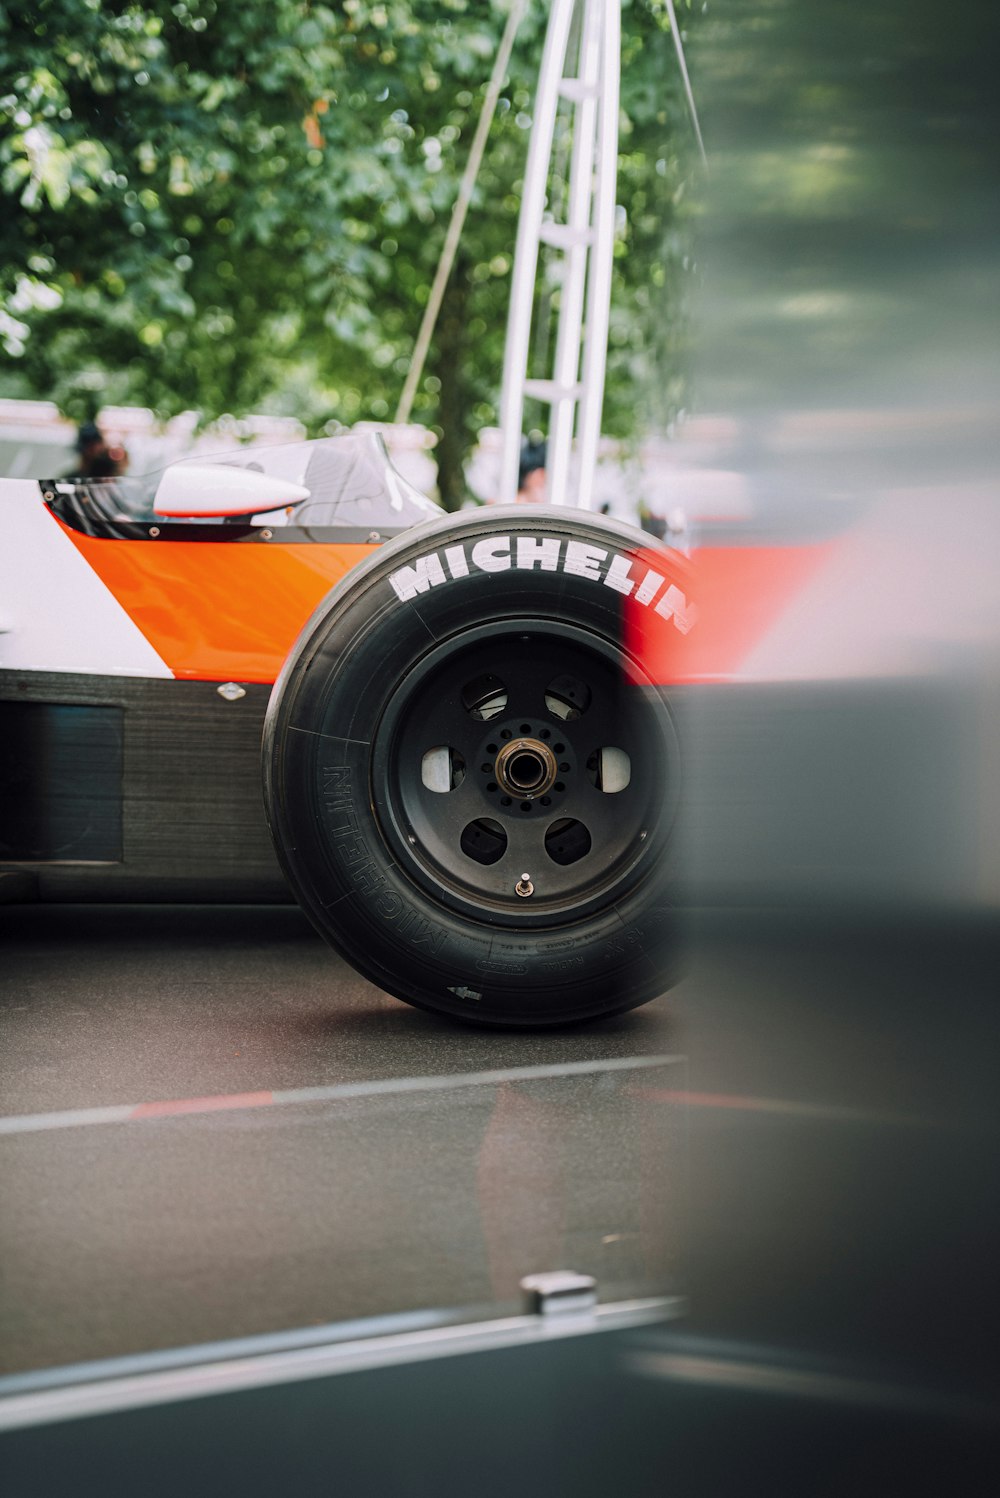 selective photo of vehicle wheel with Michelin tire